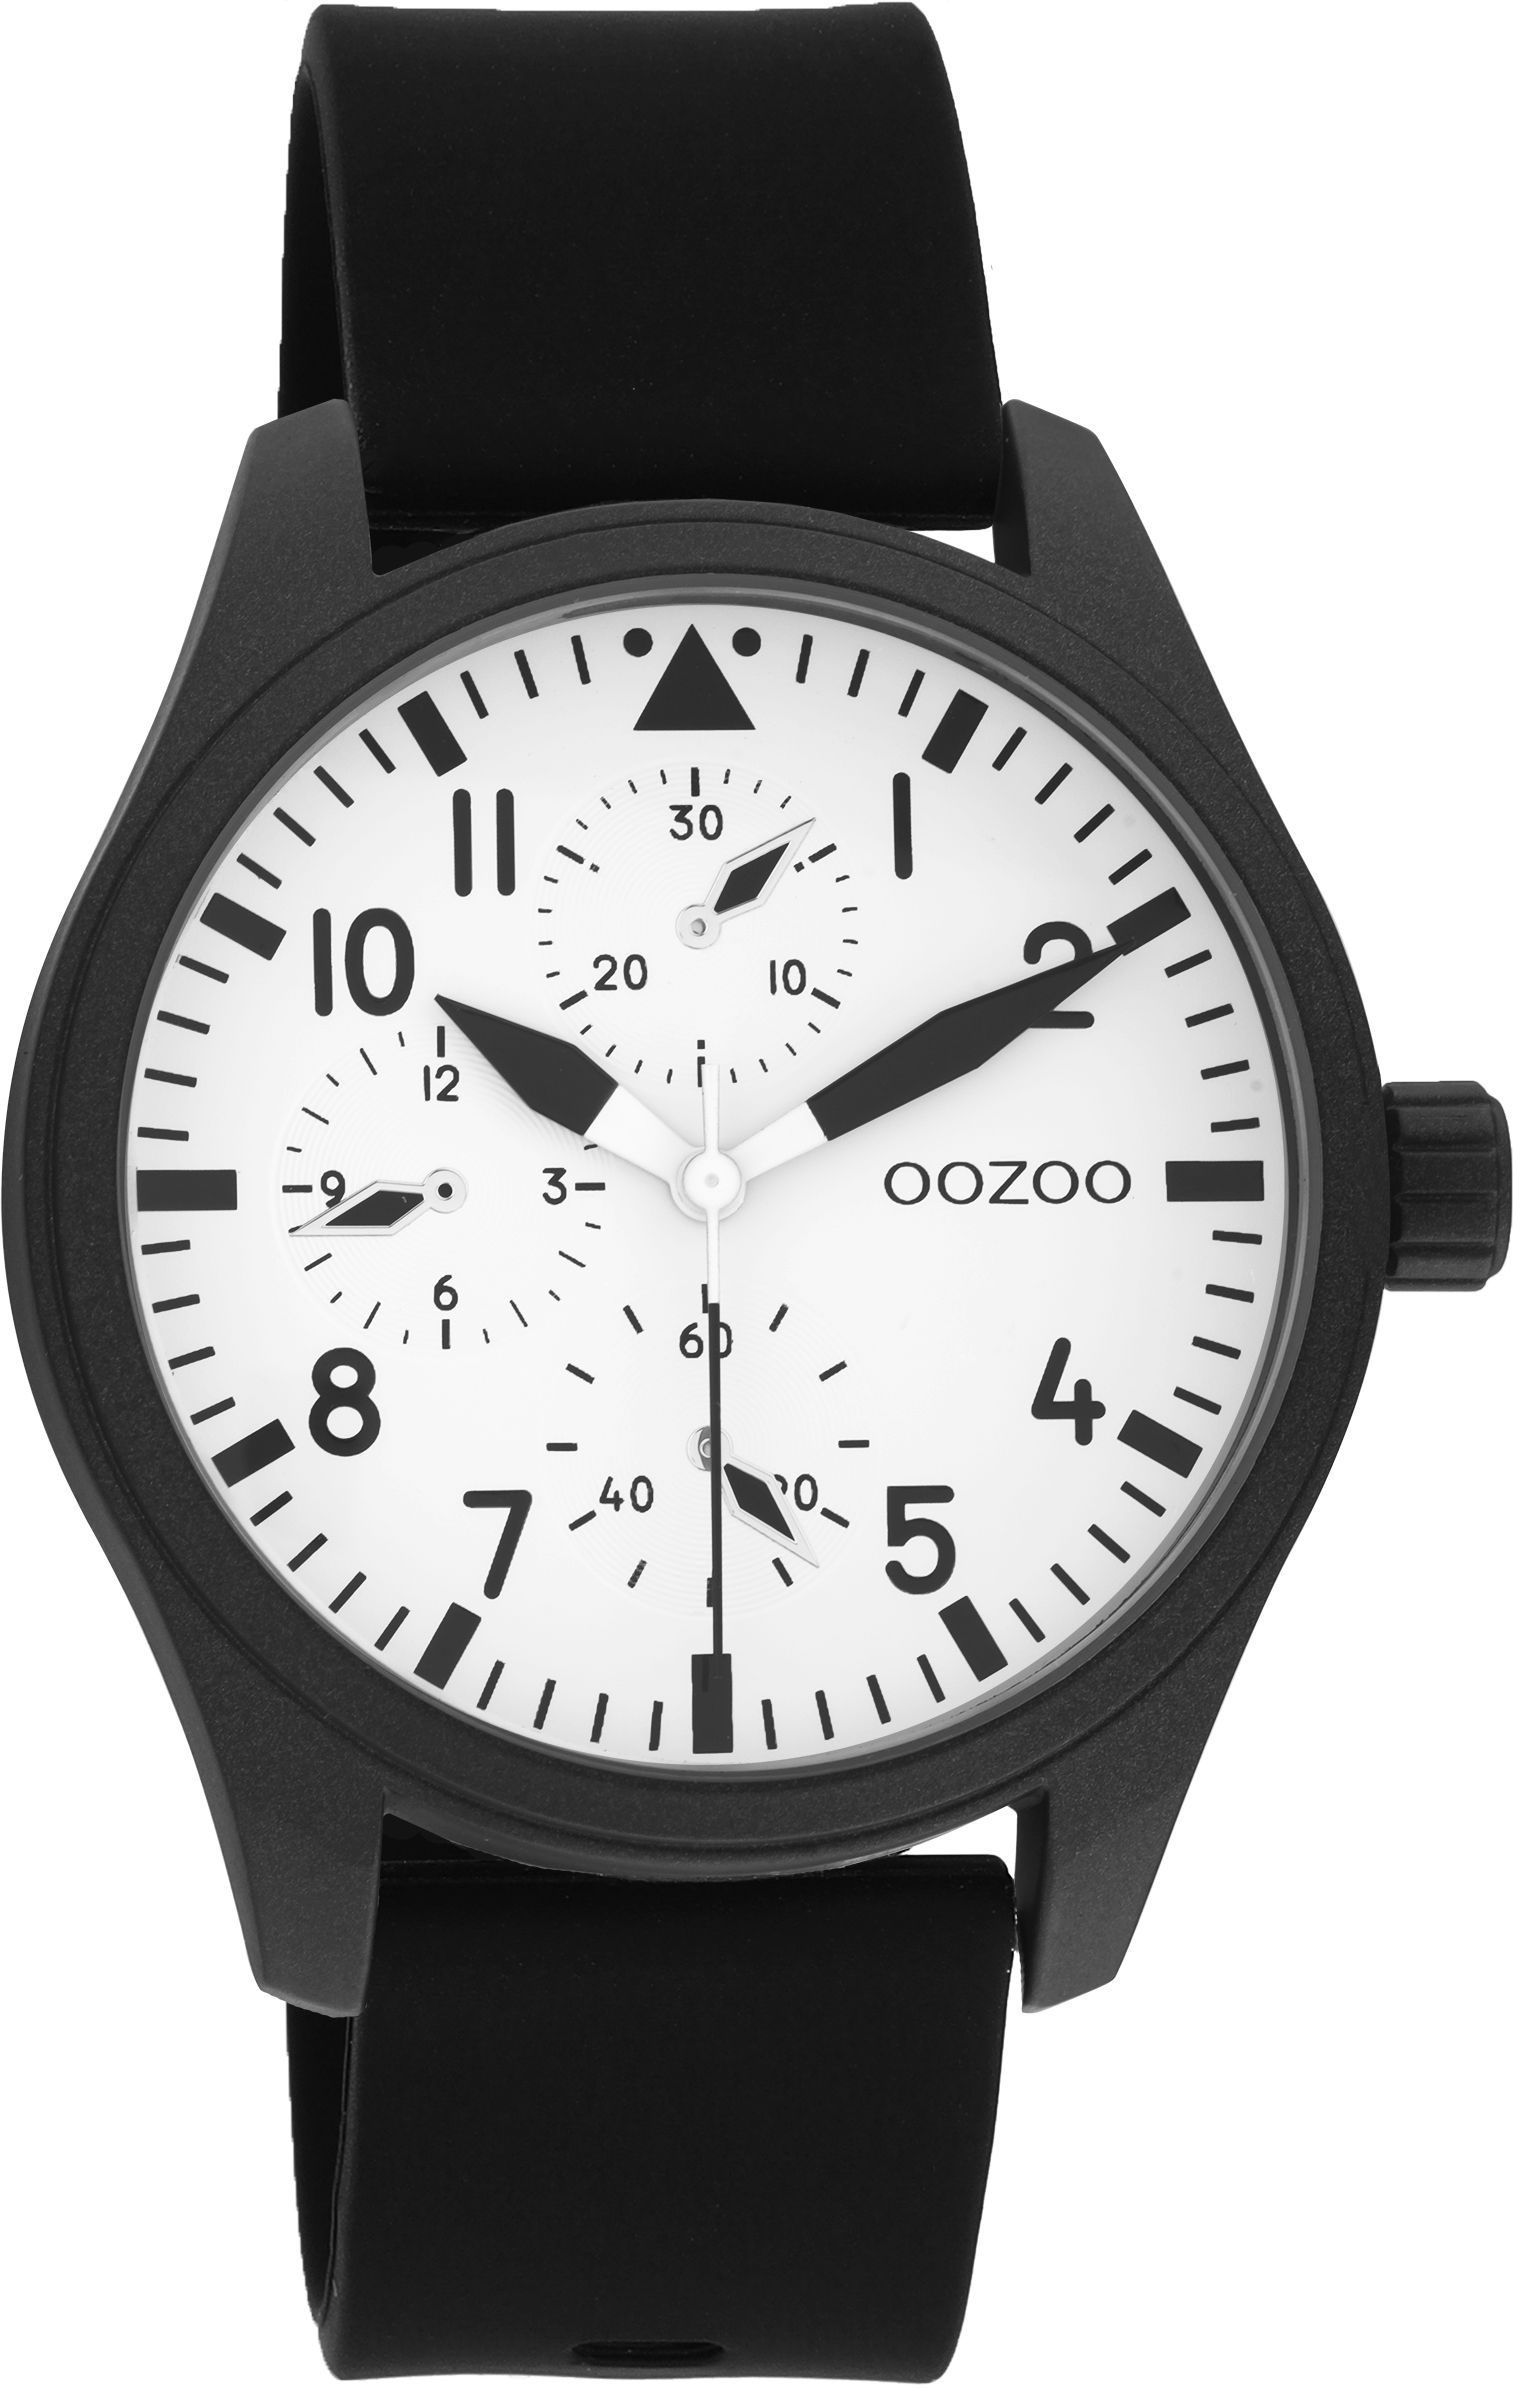 OOZOO TIMEPIECES G0142